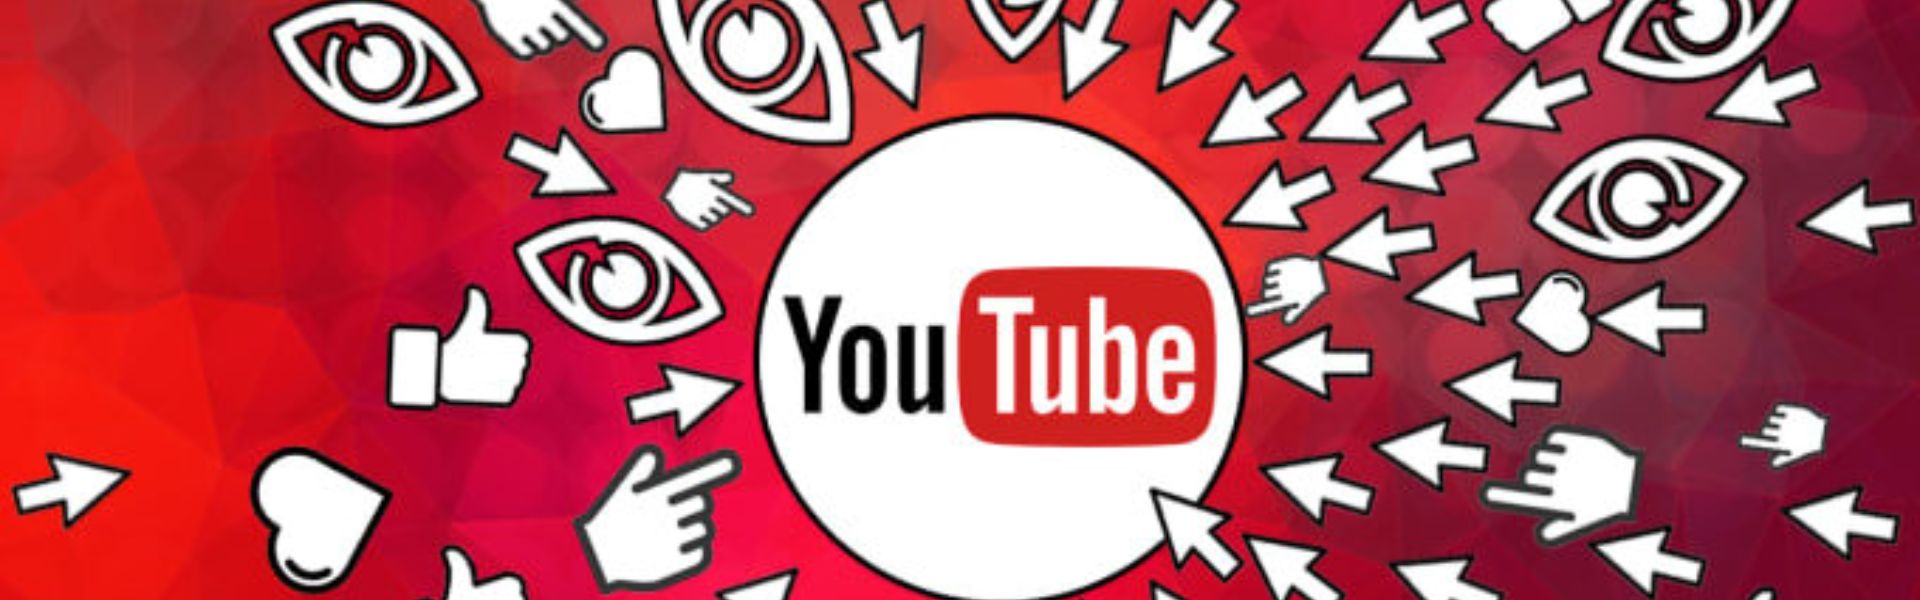 Advertise Your YouTube Channel